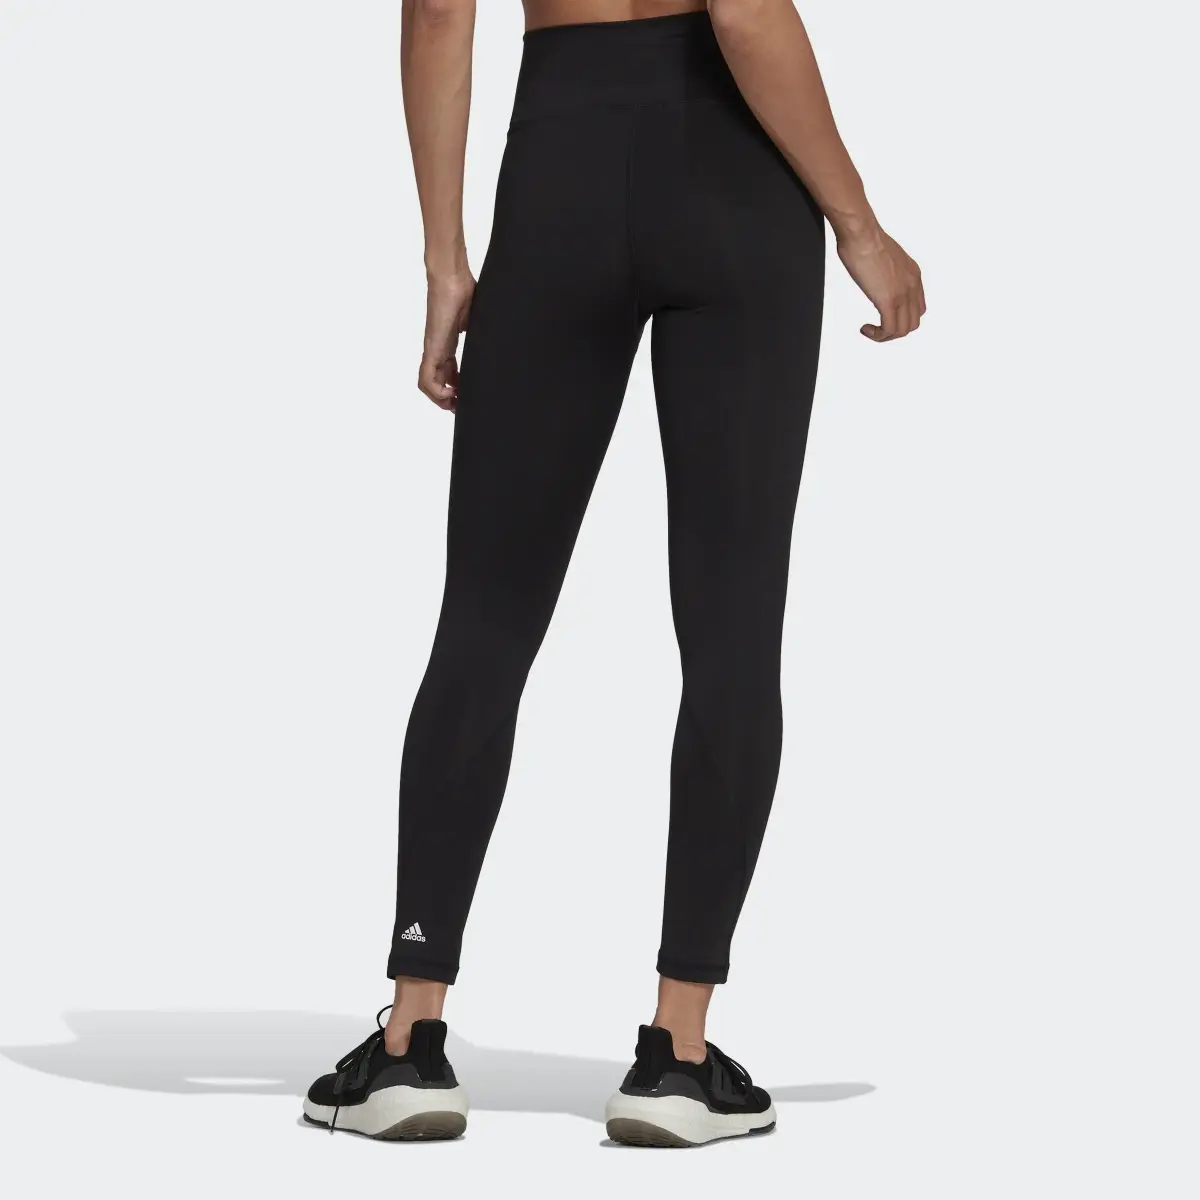 Adidas Optime Training Period-Proof 7/8 Tights. 2